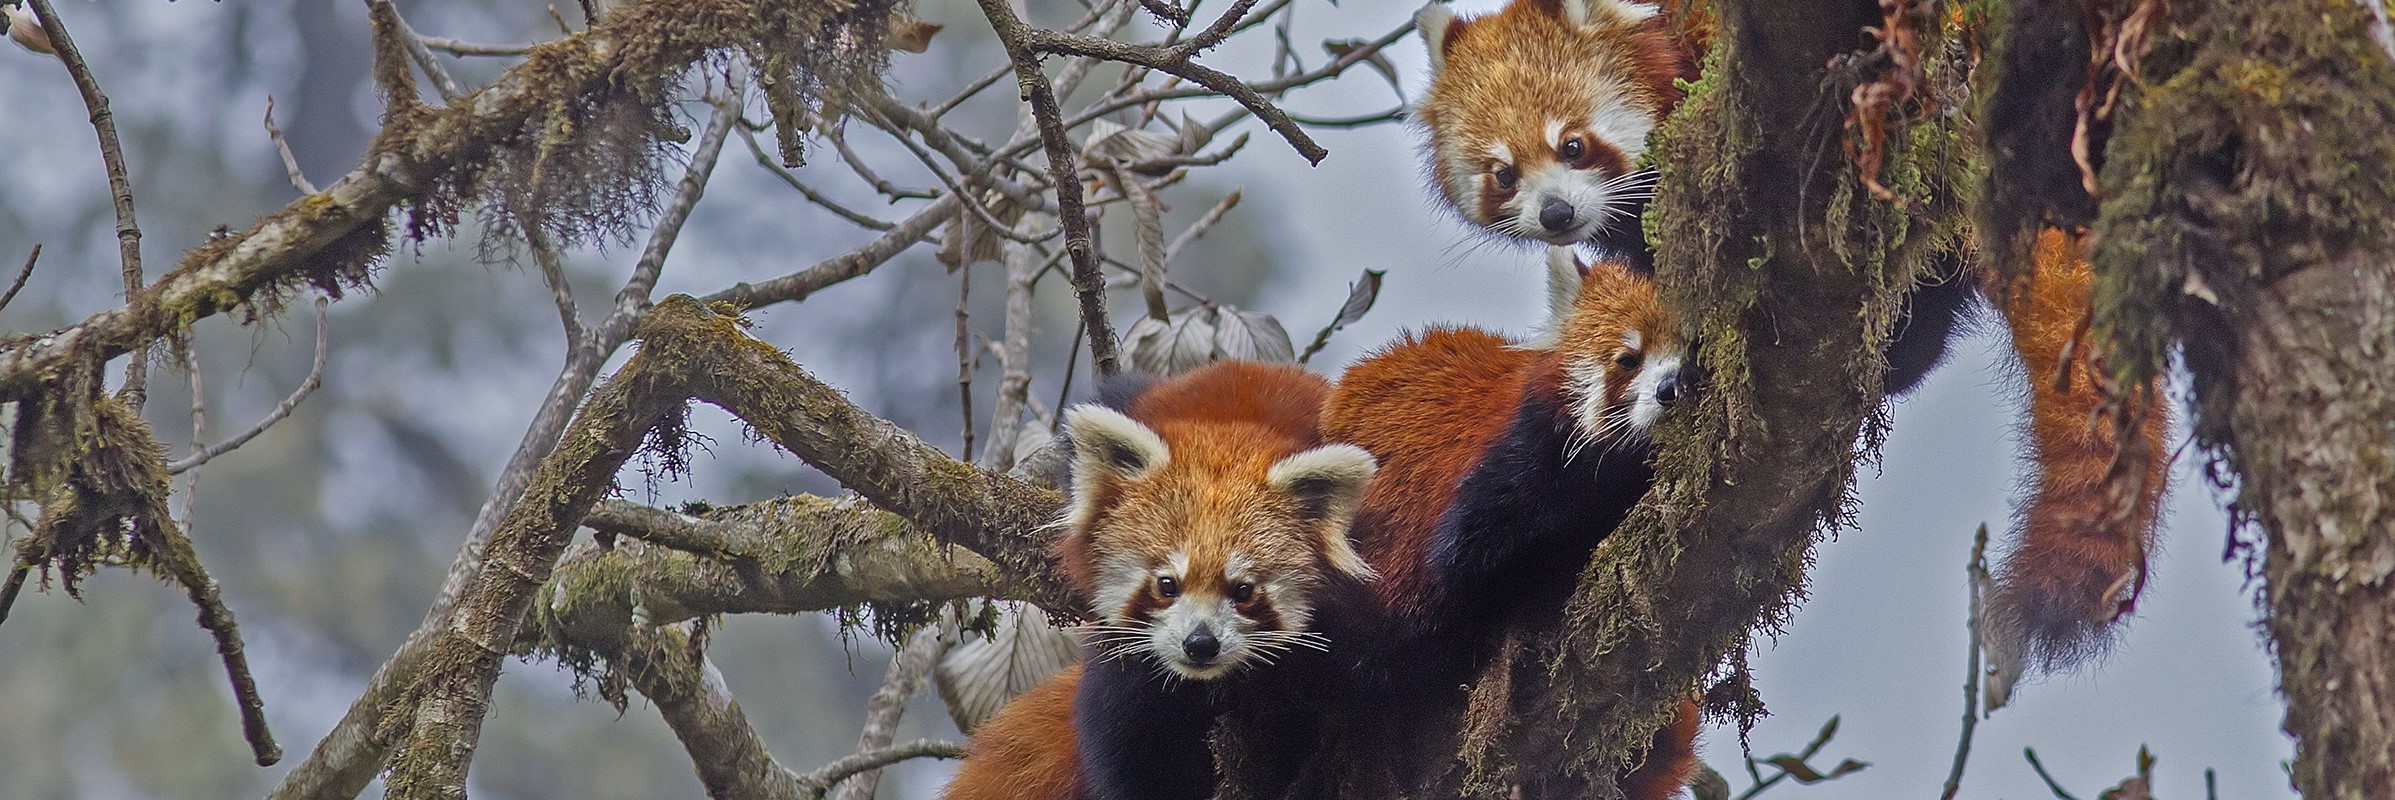 Three red pandas nestle amid the branches of a frost-covered tree in India. 